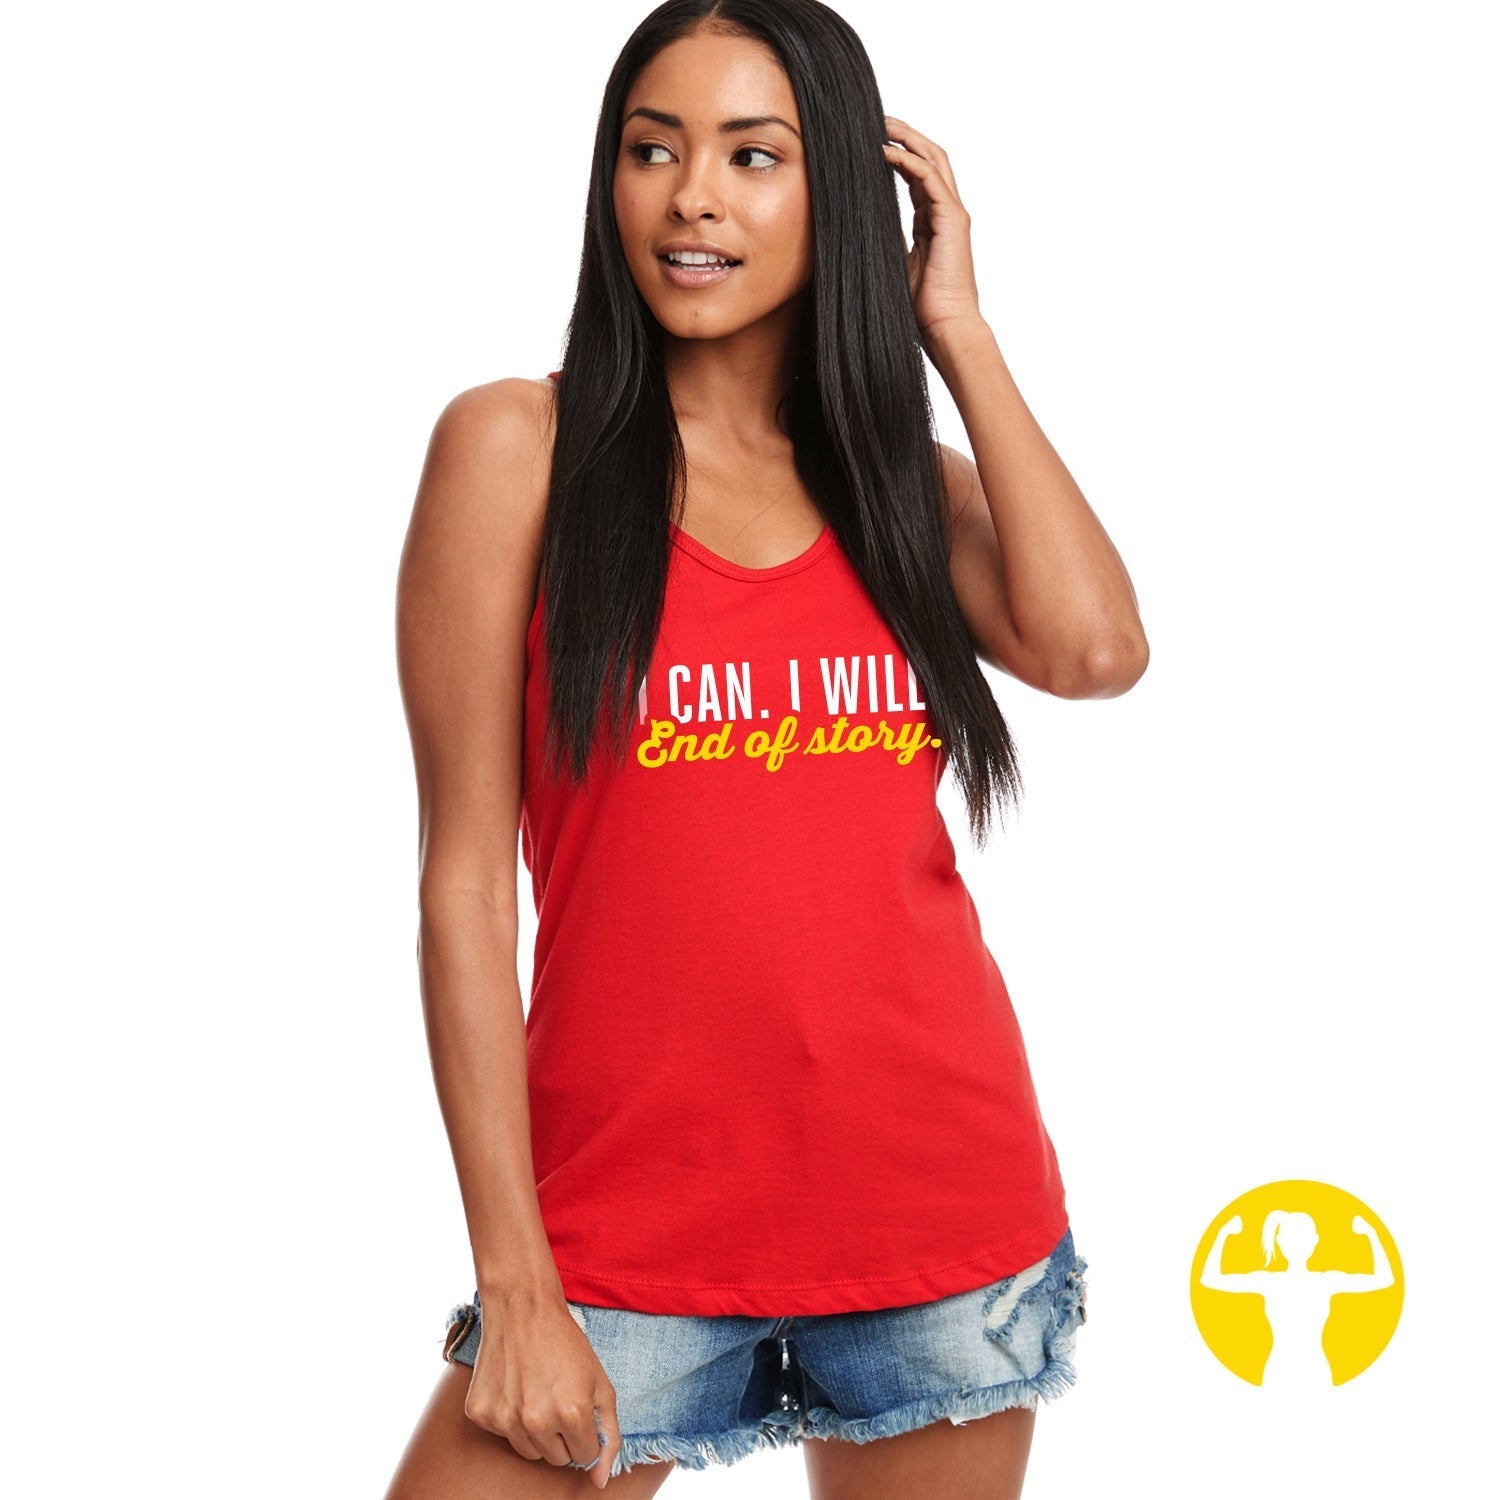 I Can. I Will. End of Story. Fitted Racerback Tank